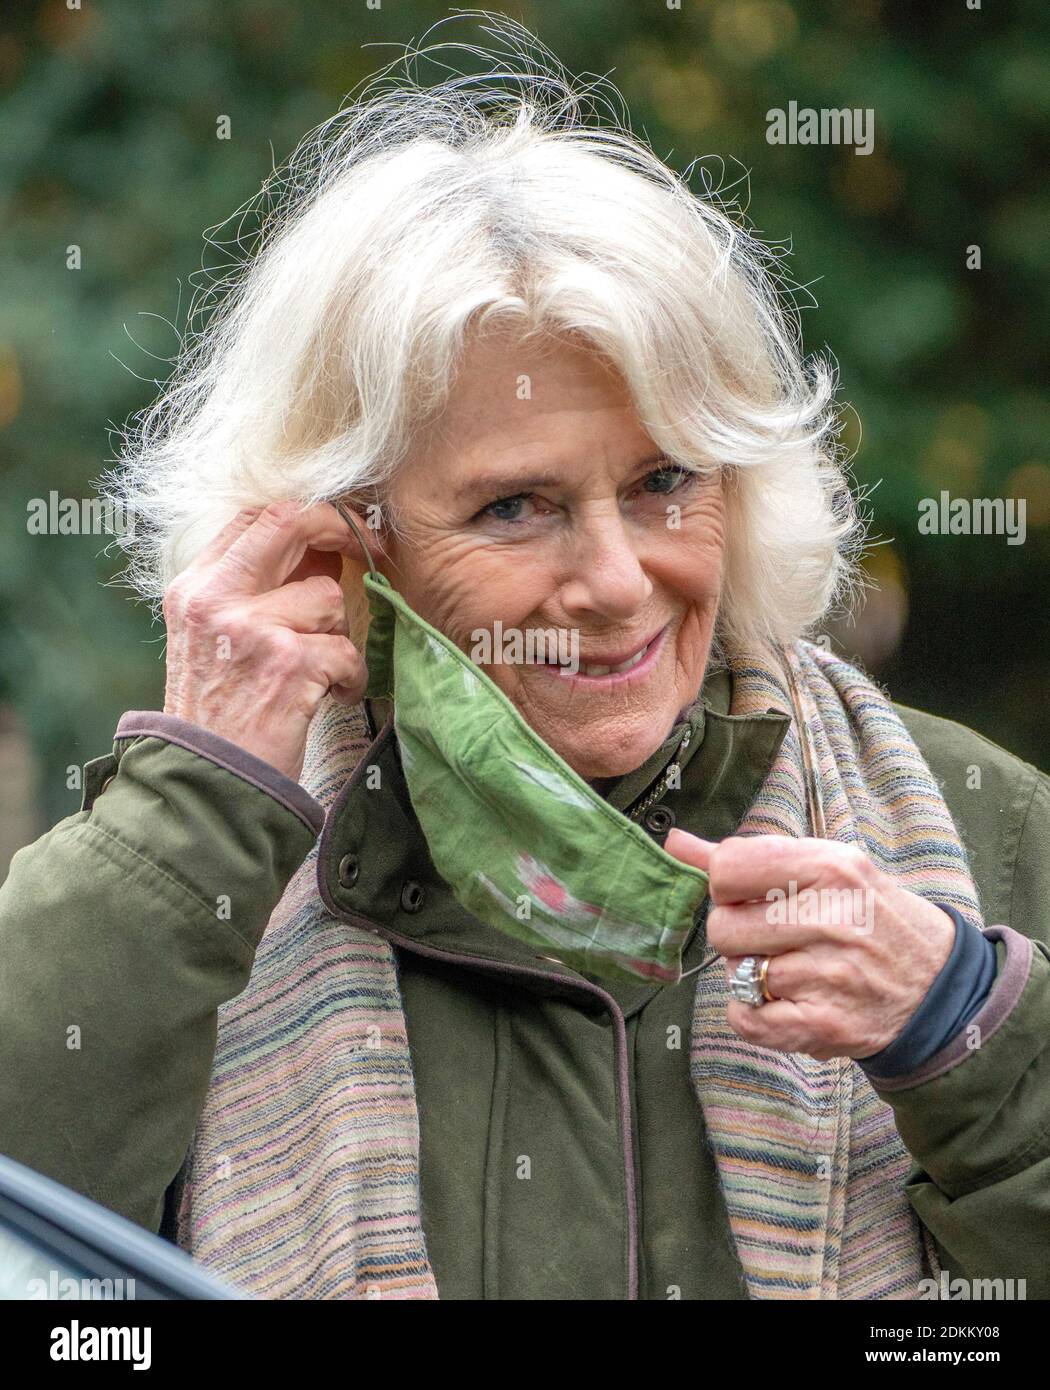 26th October 2020 - Camilla Duchess of Cornwall during a visit to Westonbirt, The National Arboretum in Tetbury, Gloucestershire. The Arboretum attracts over 550,000 visitors a year providing a beautiful landscape that people can visit to enjoy and learn about trees, as well as a vital resource for scientists to research more about these plants and understand how to protect them for the future. Photo Credit: ALPR/AdMedia /MediaPunch ***FOR USA ONLY*** Stock Photo